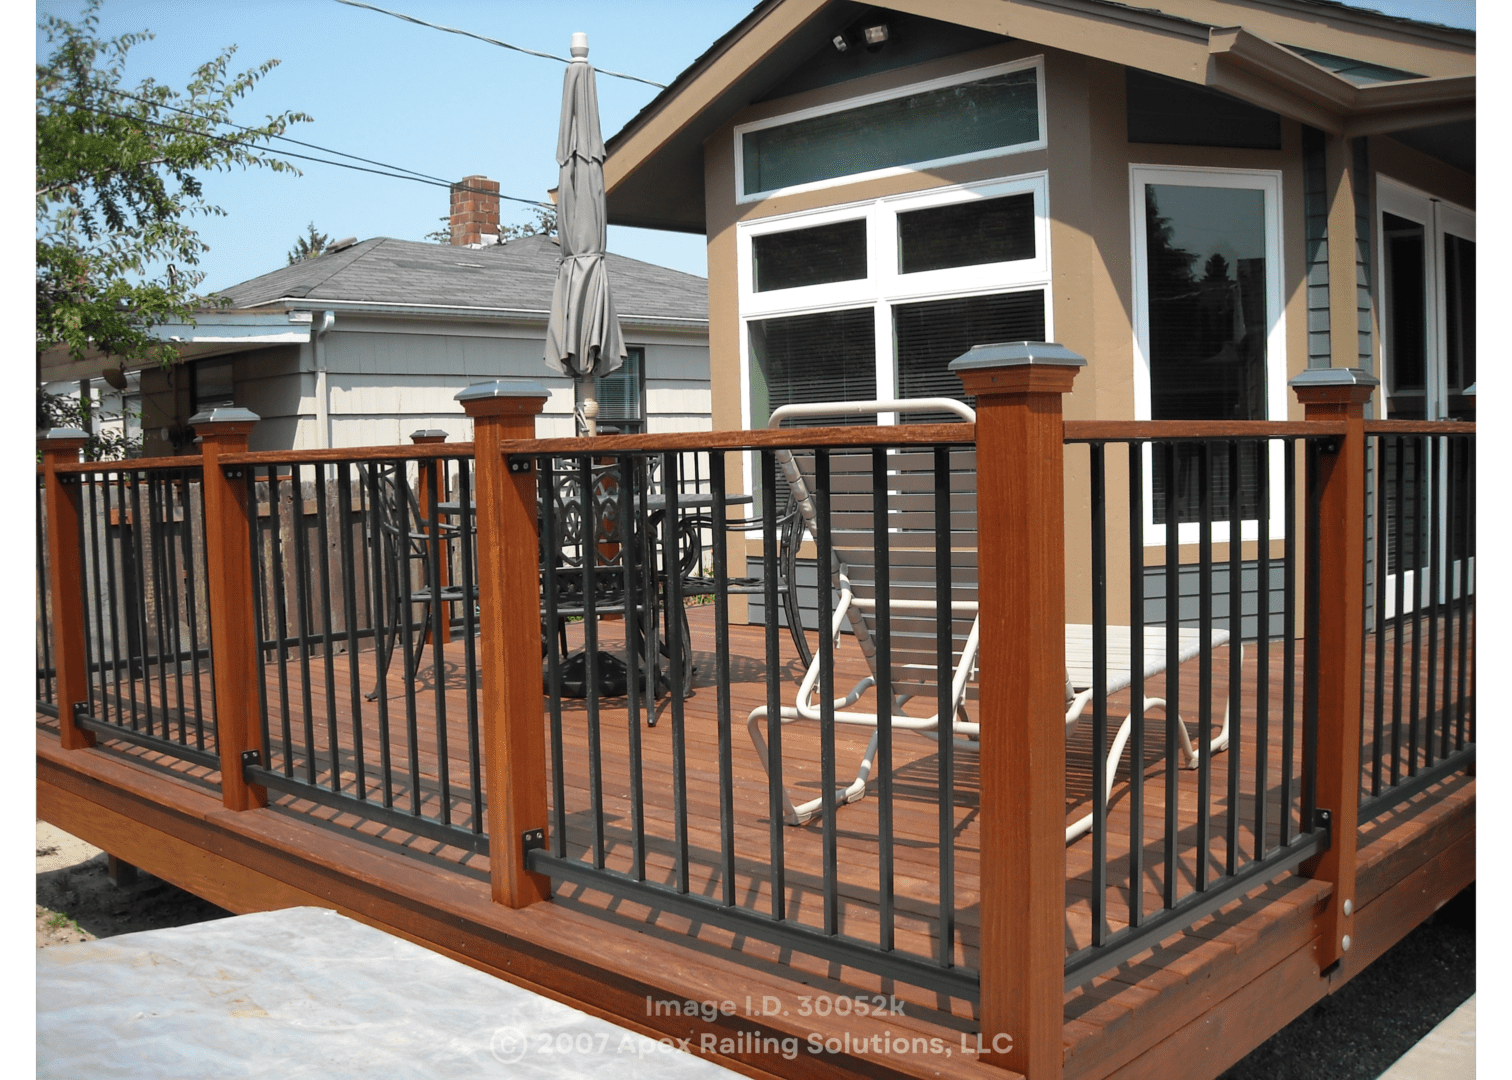 An outdoor space of a property with brown handrails